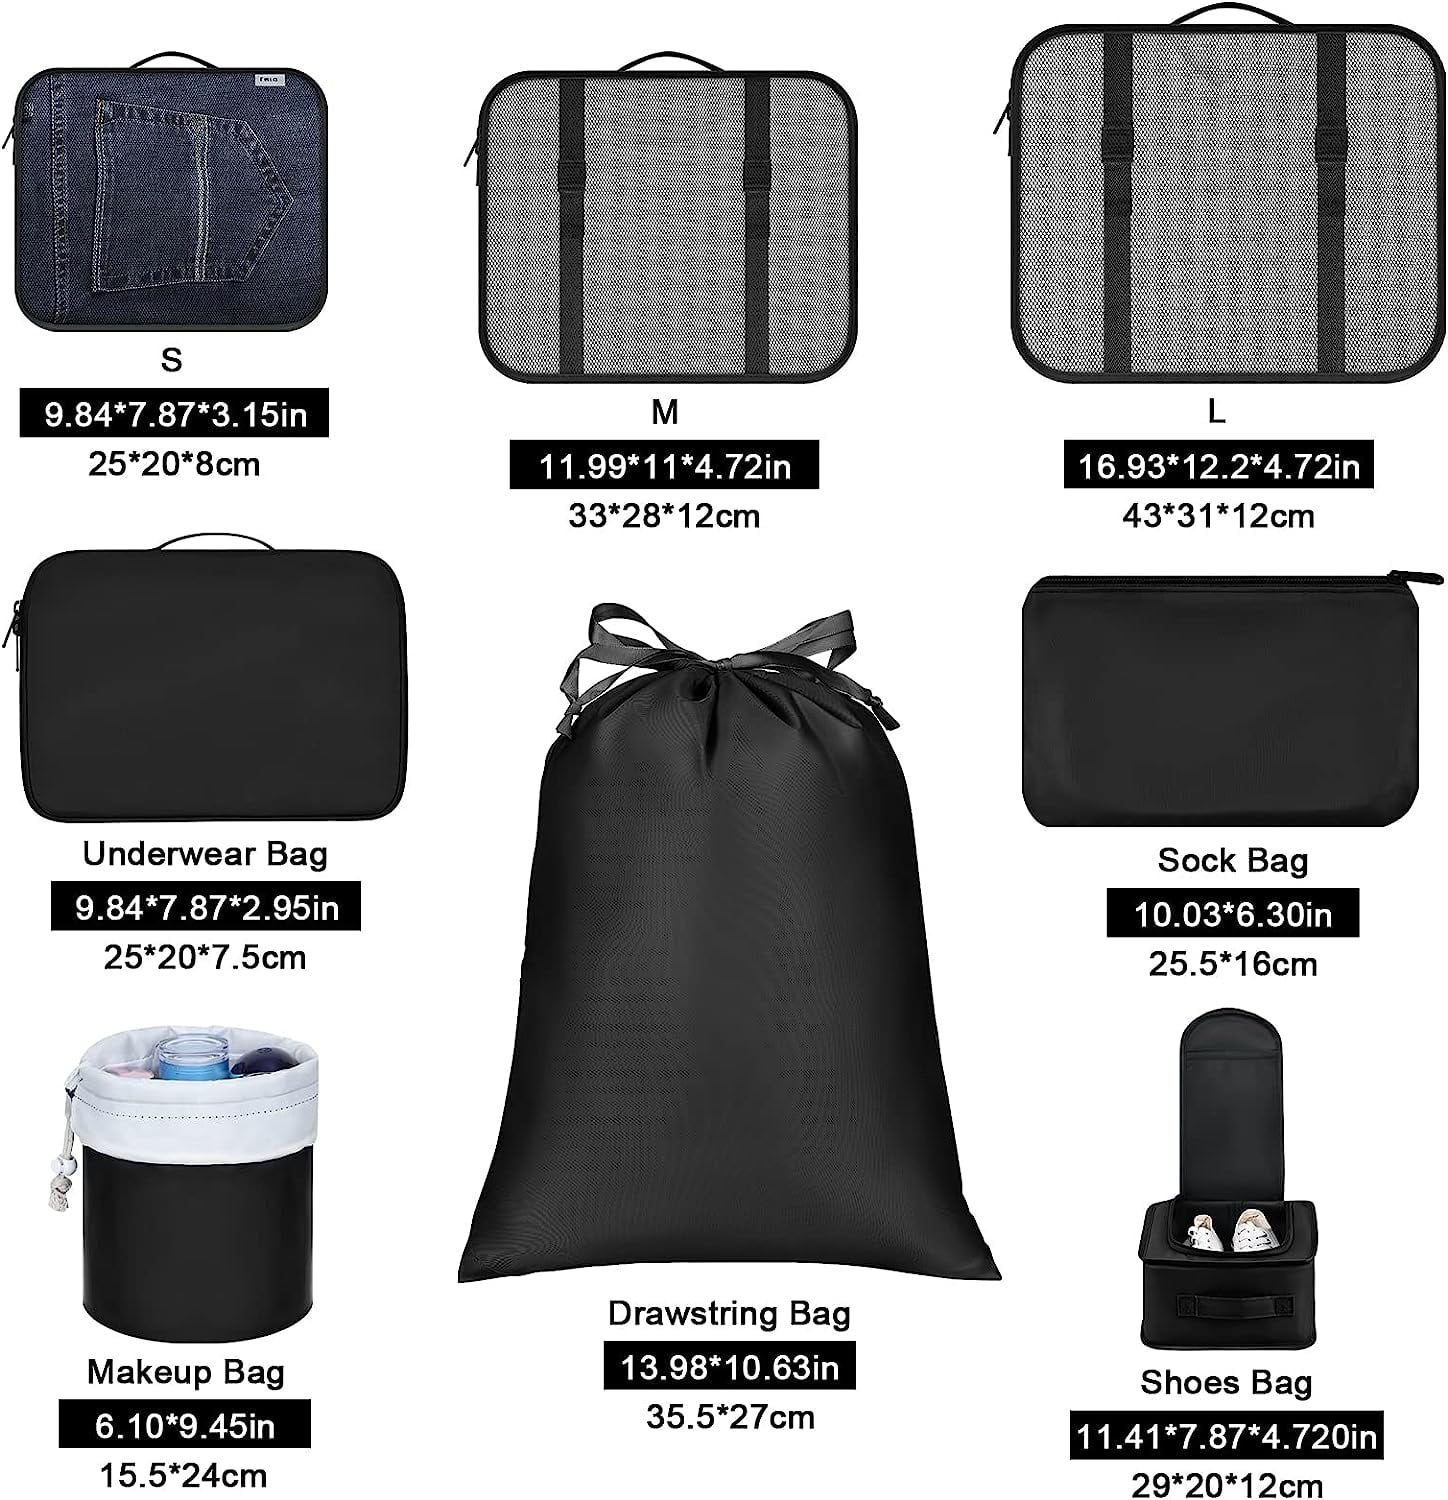 DIMJ Packing Cubes for Travel, Lightweight Luggage Organizers for Suitcase  Durable Luggage Cubes for…See more DIMJ Packing Cubes for Travel